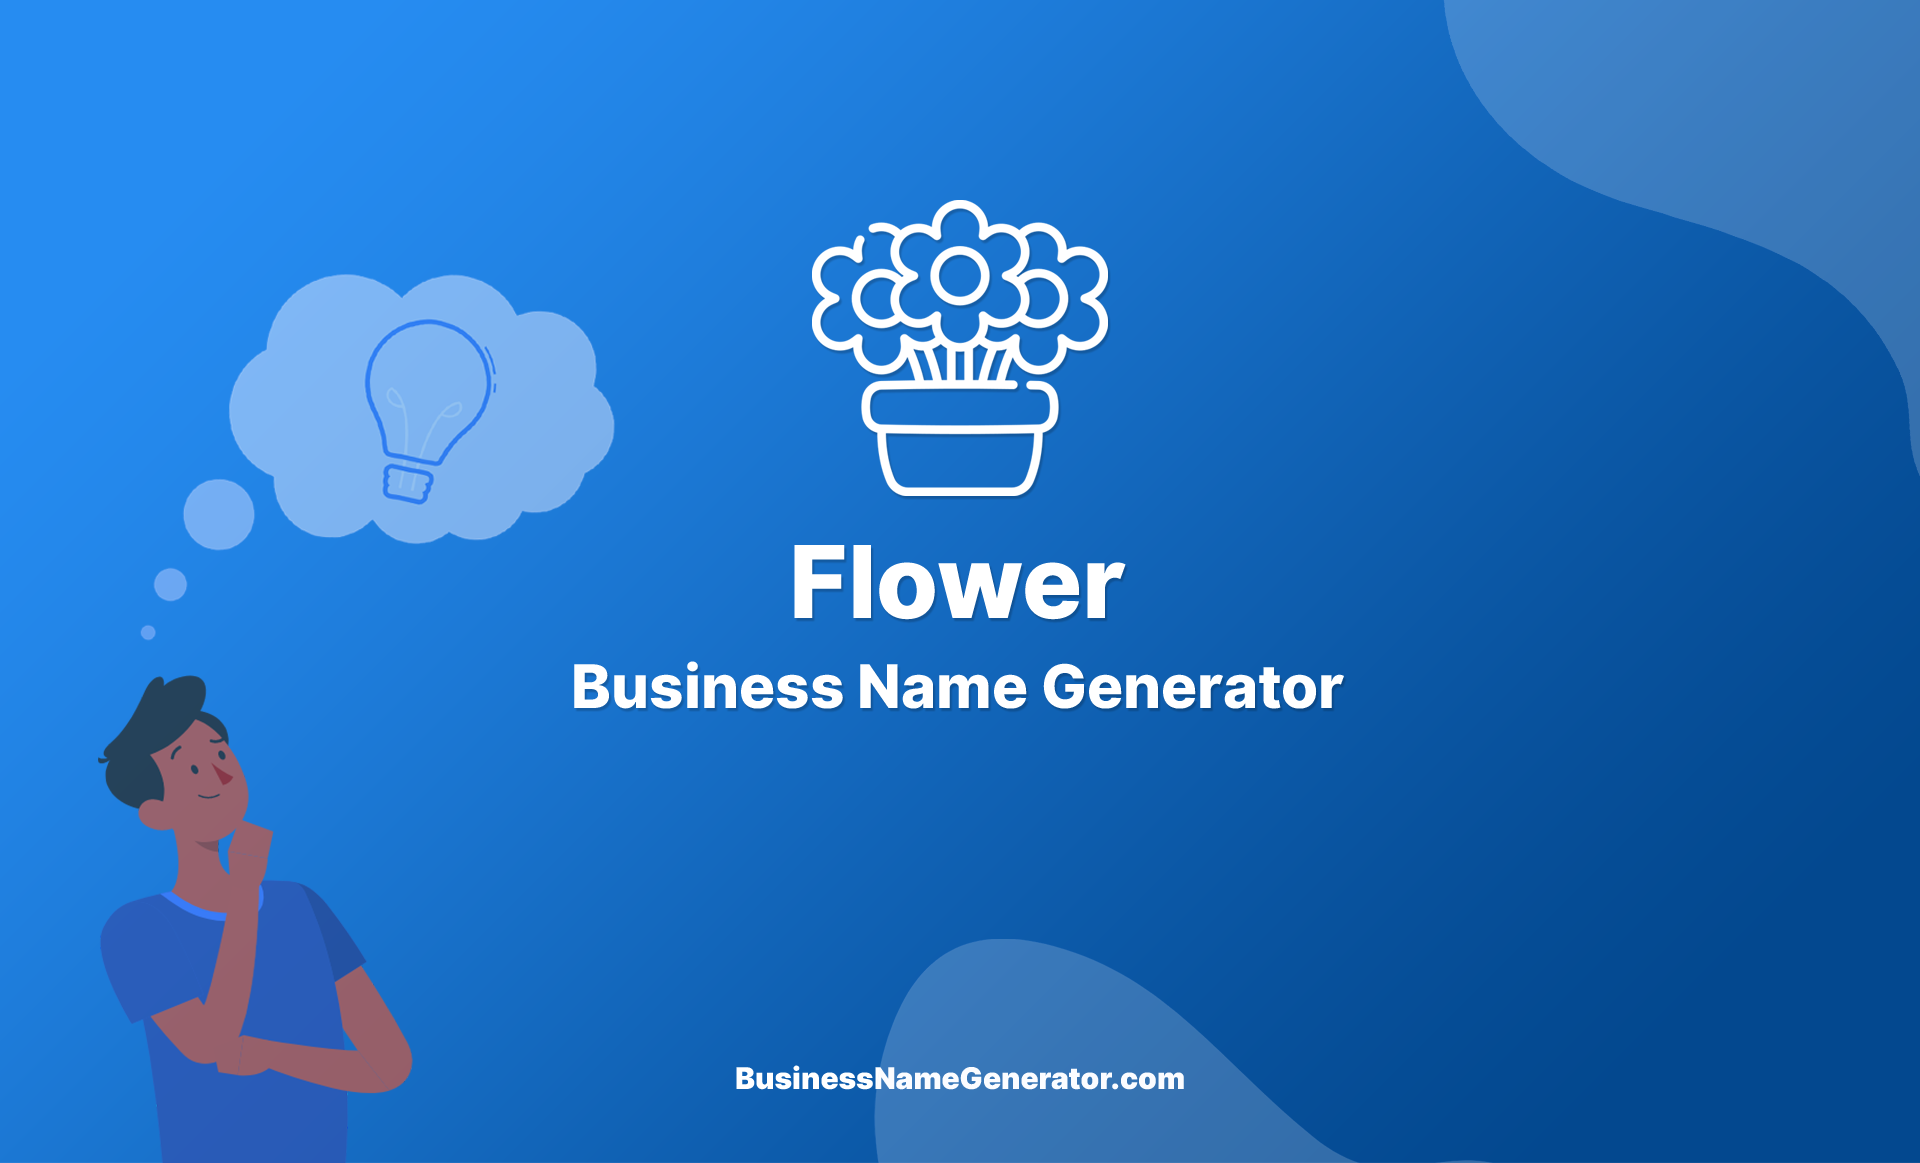 Flower Business Name Generator, Ideas & Guide